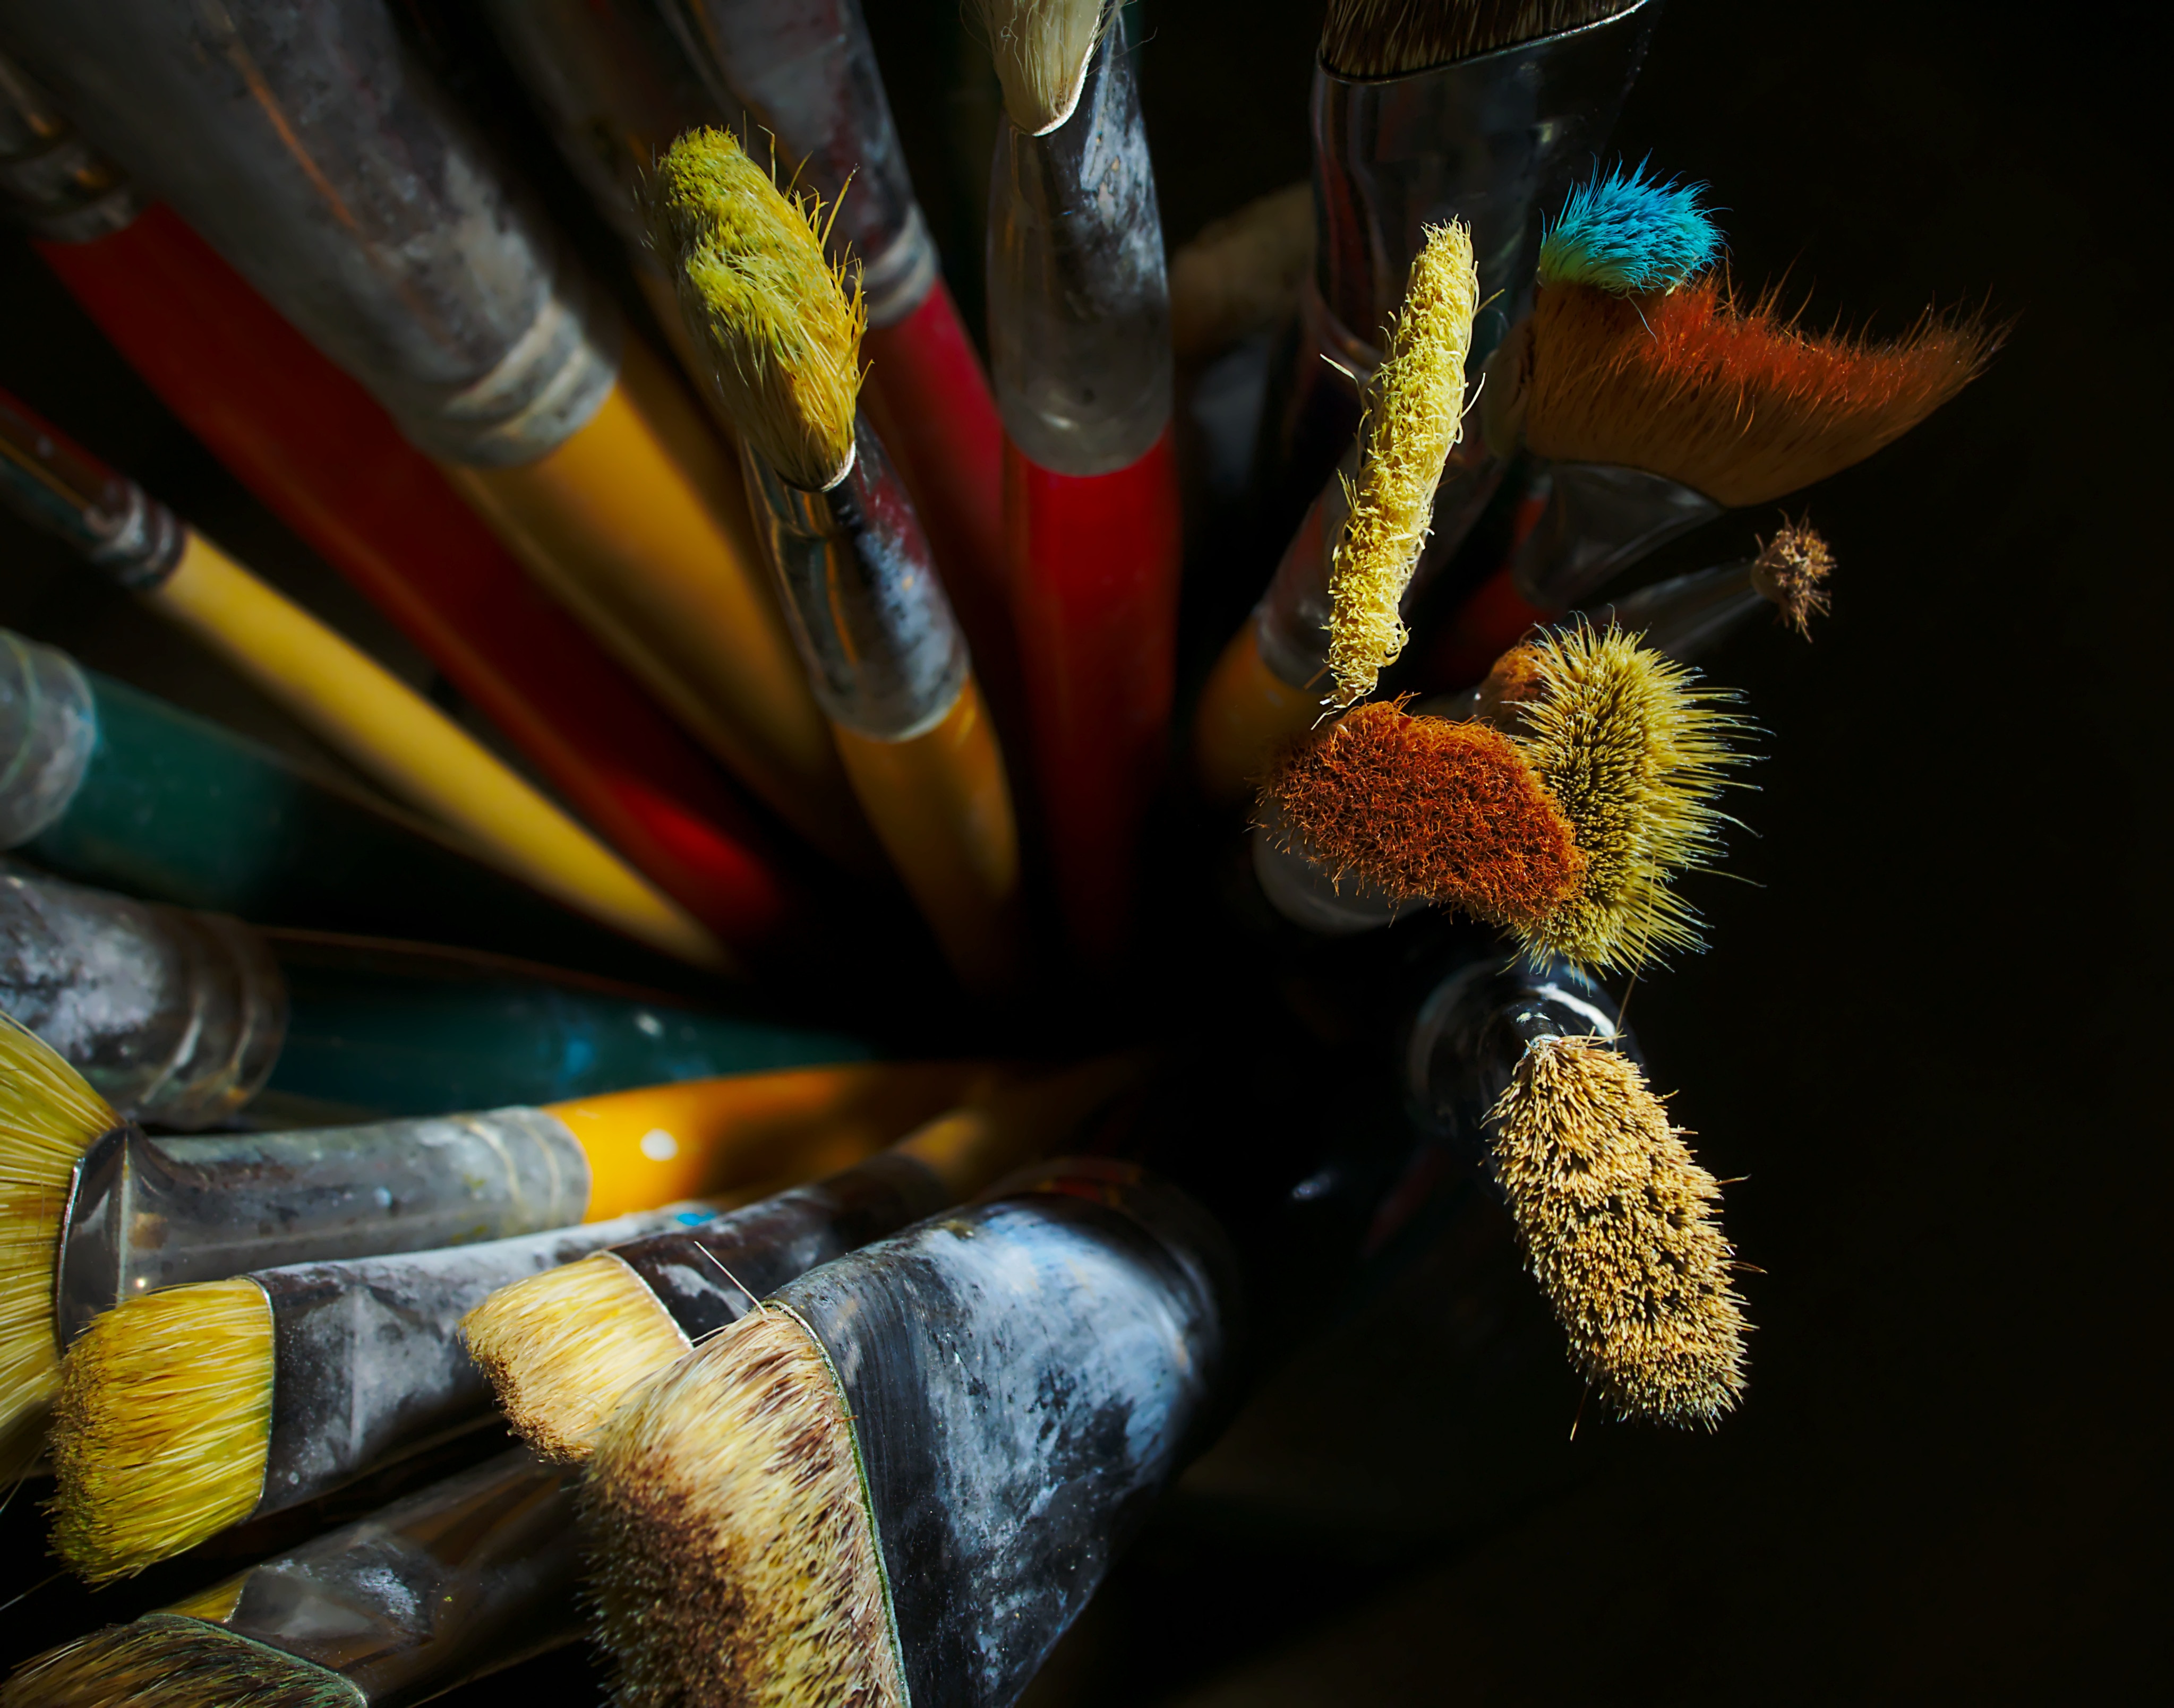 painting, brushes, miscellanea, miscellaneous, wood, wooden, multicolored, motley, drawing, tassels 2160p